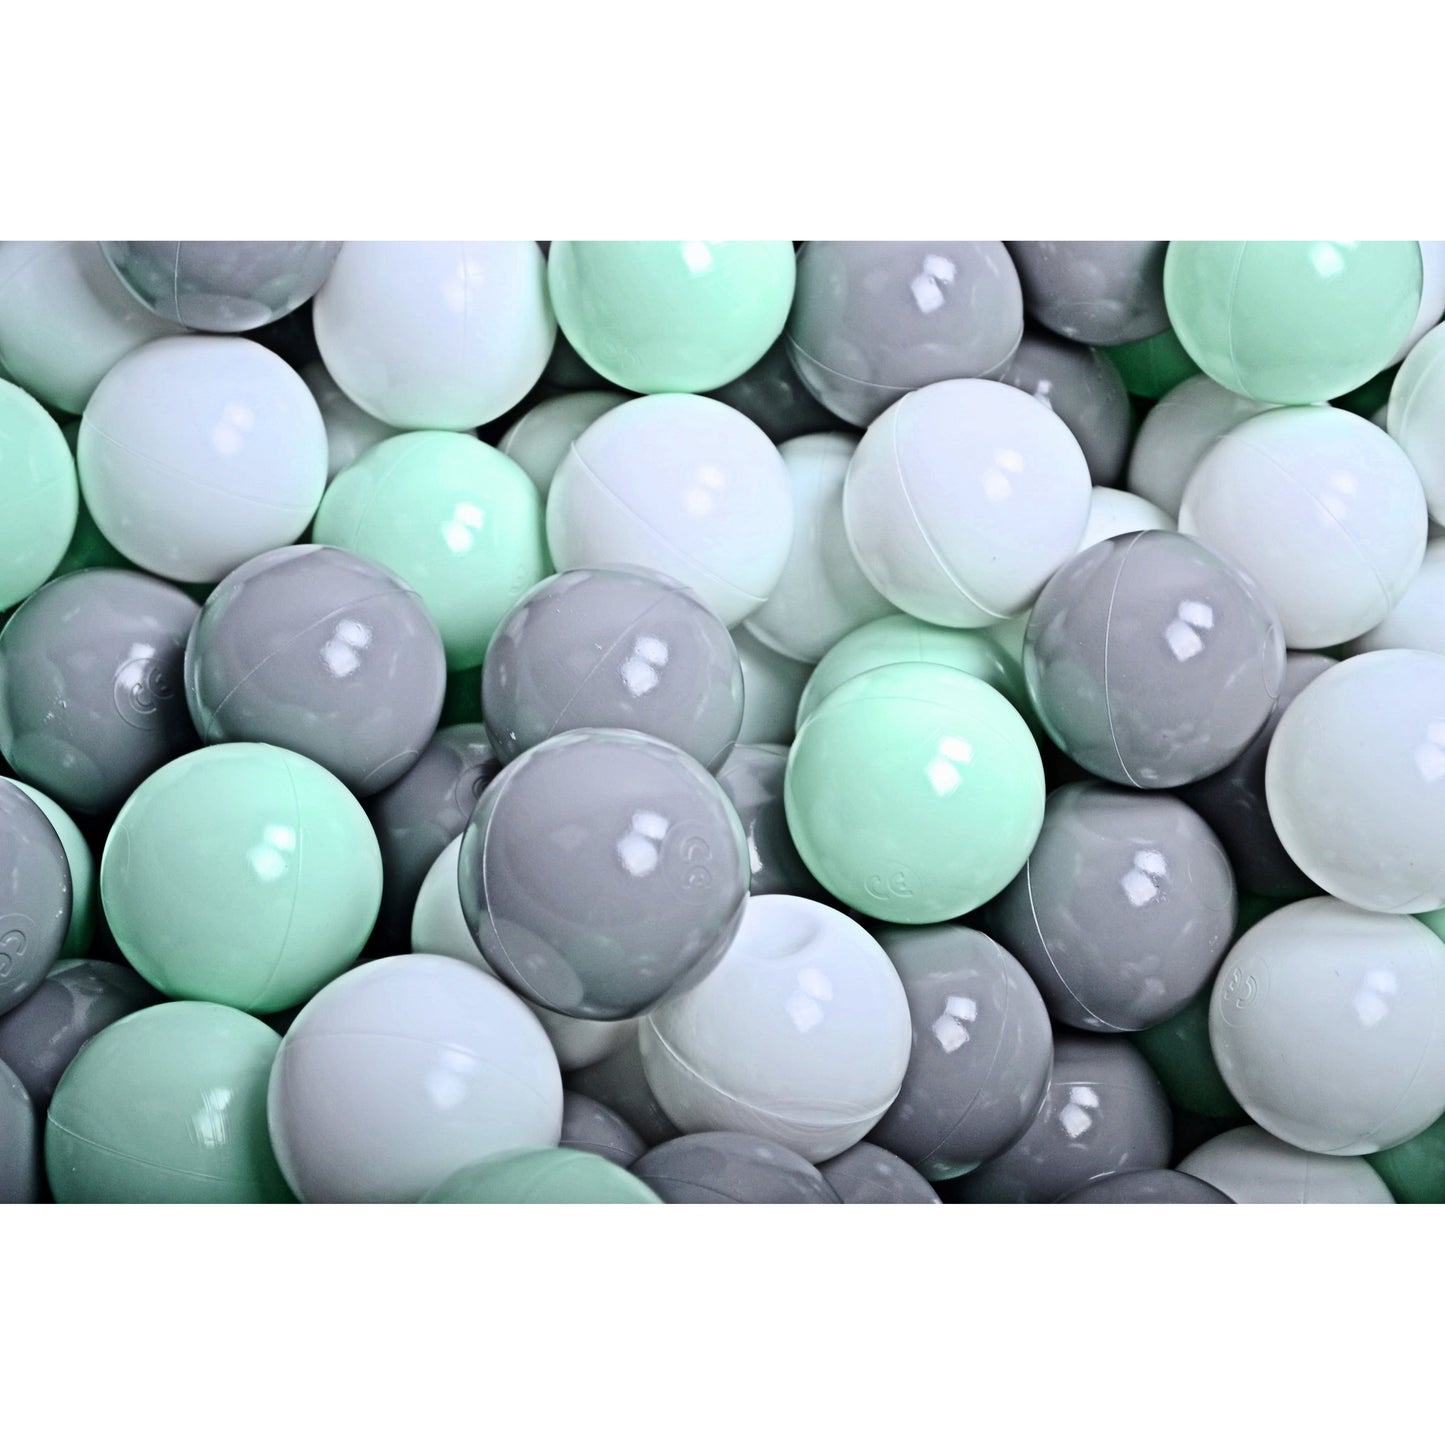 Taupe Velvet Round Foam Ball Pit - Select Your Own Balls